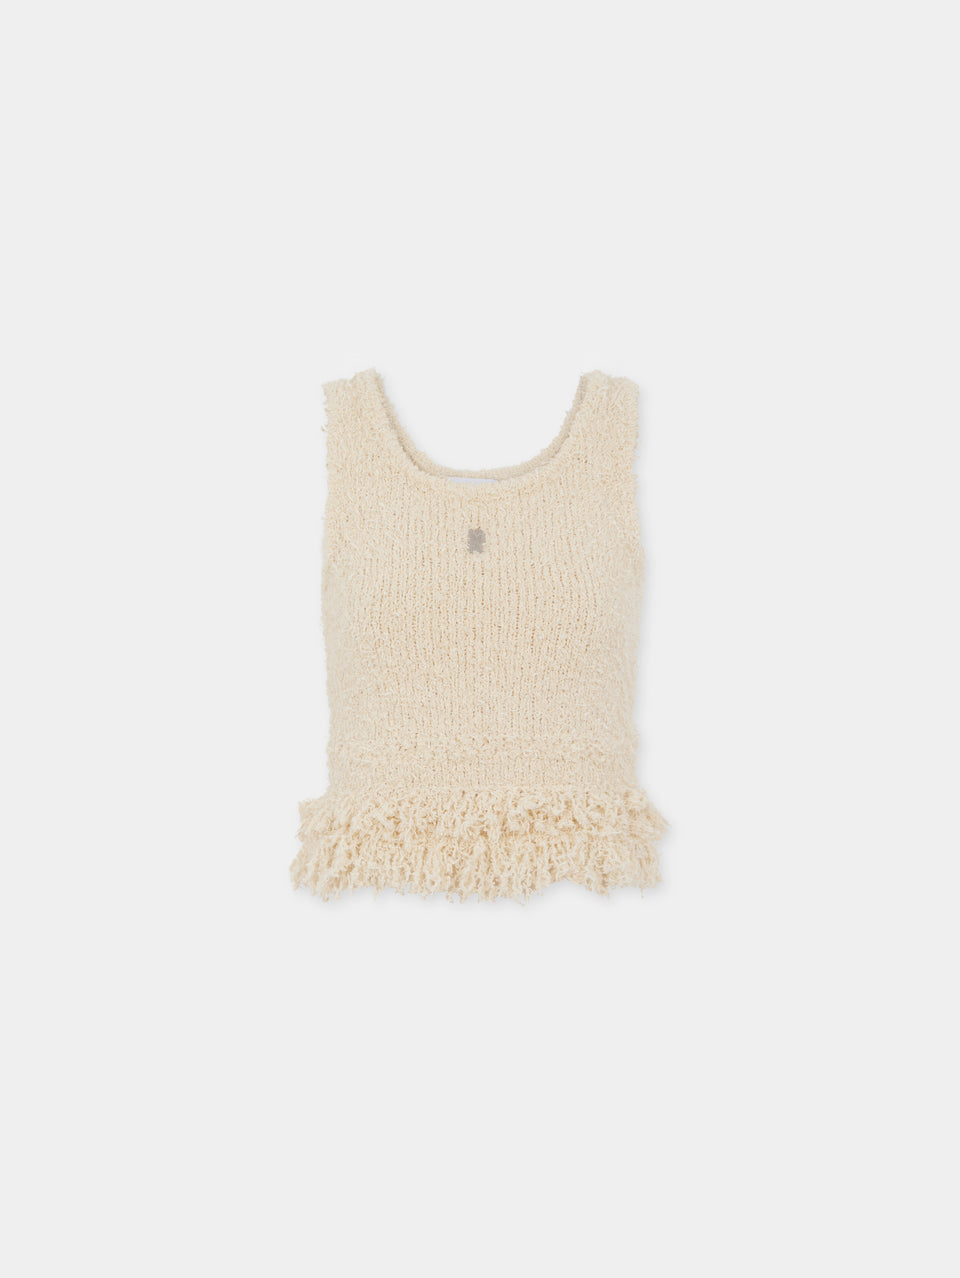 Creme woven top with knitted fringes